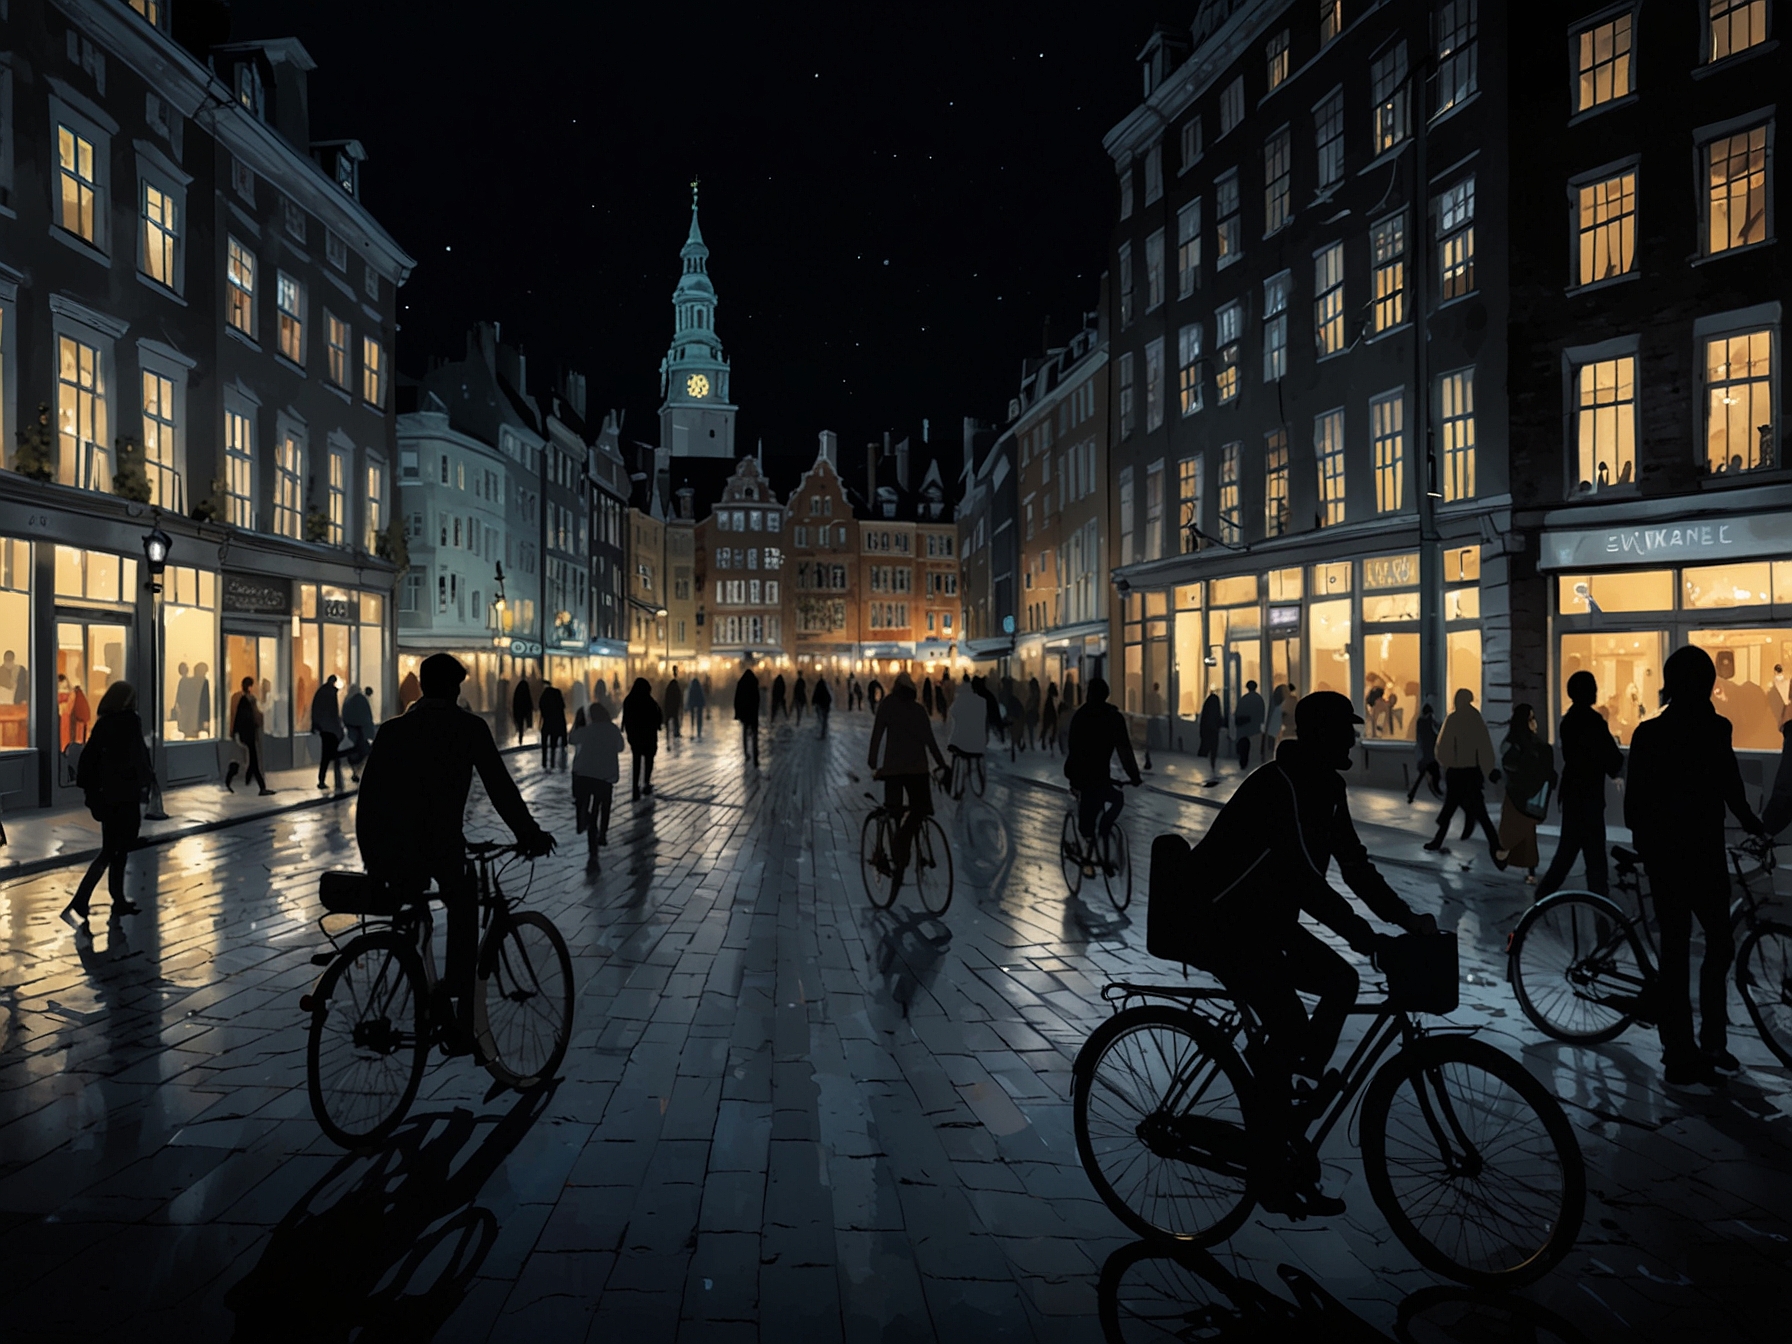 A scenic view of Copenhagen’s well-lit and crowded city streets at night, illustrating the city’s safe environment and the presence of vigilant cyclists and pedestrians.